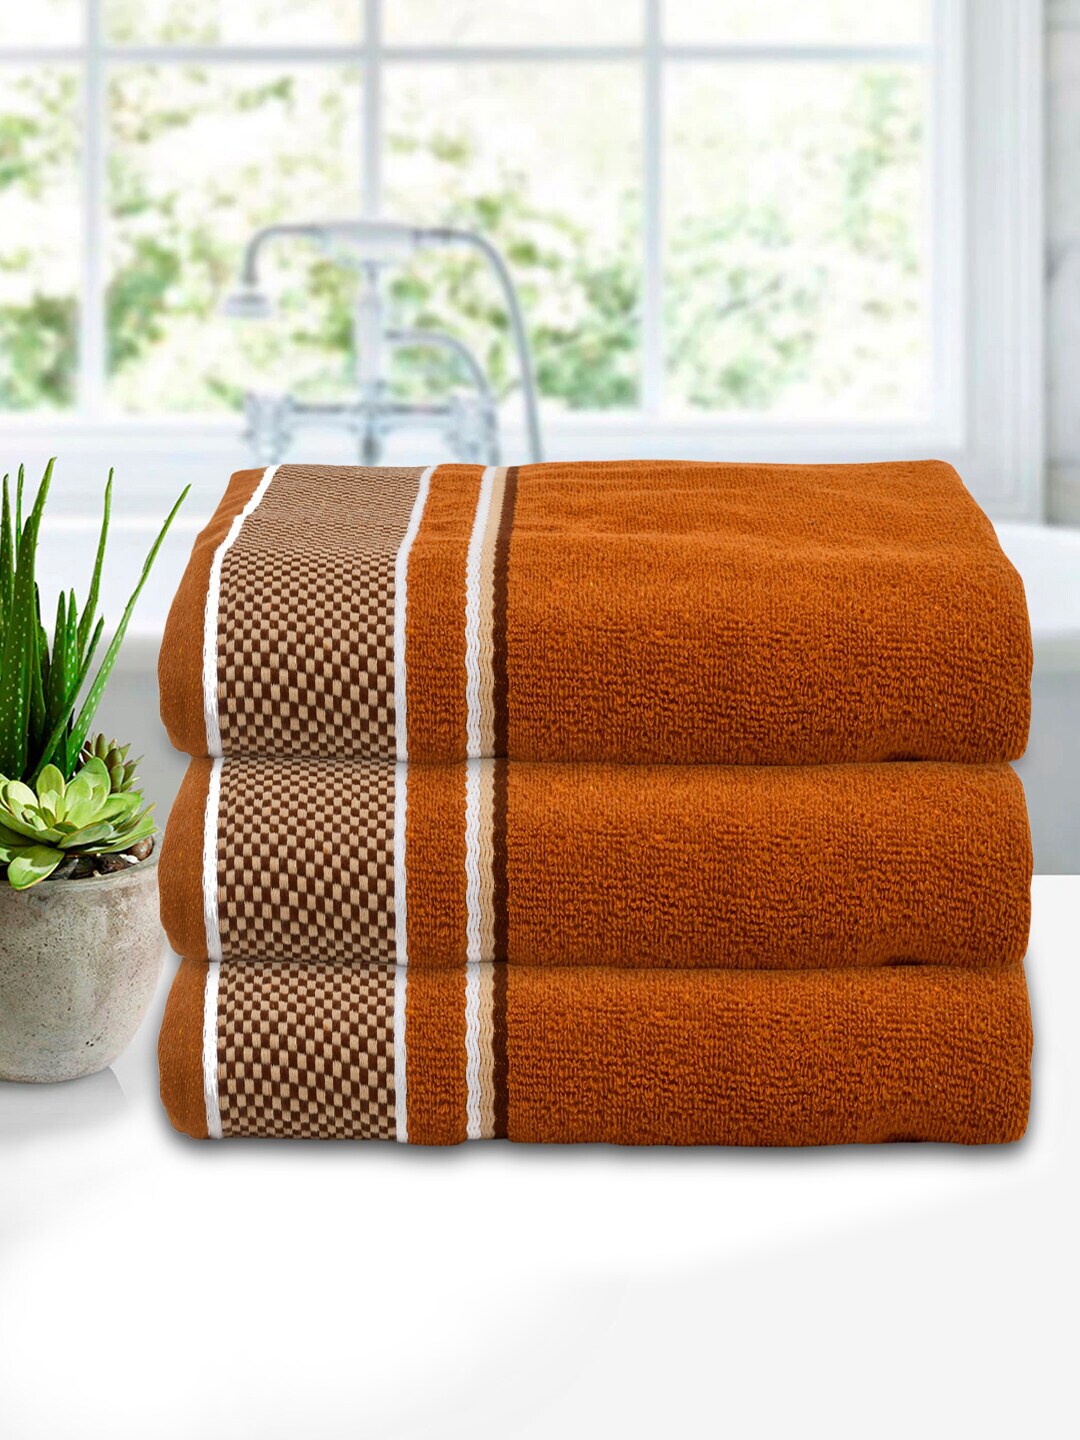 Kuber Industries Set Of 3 Brown Solid 400 GSM Cotton Bath Towels Price in India